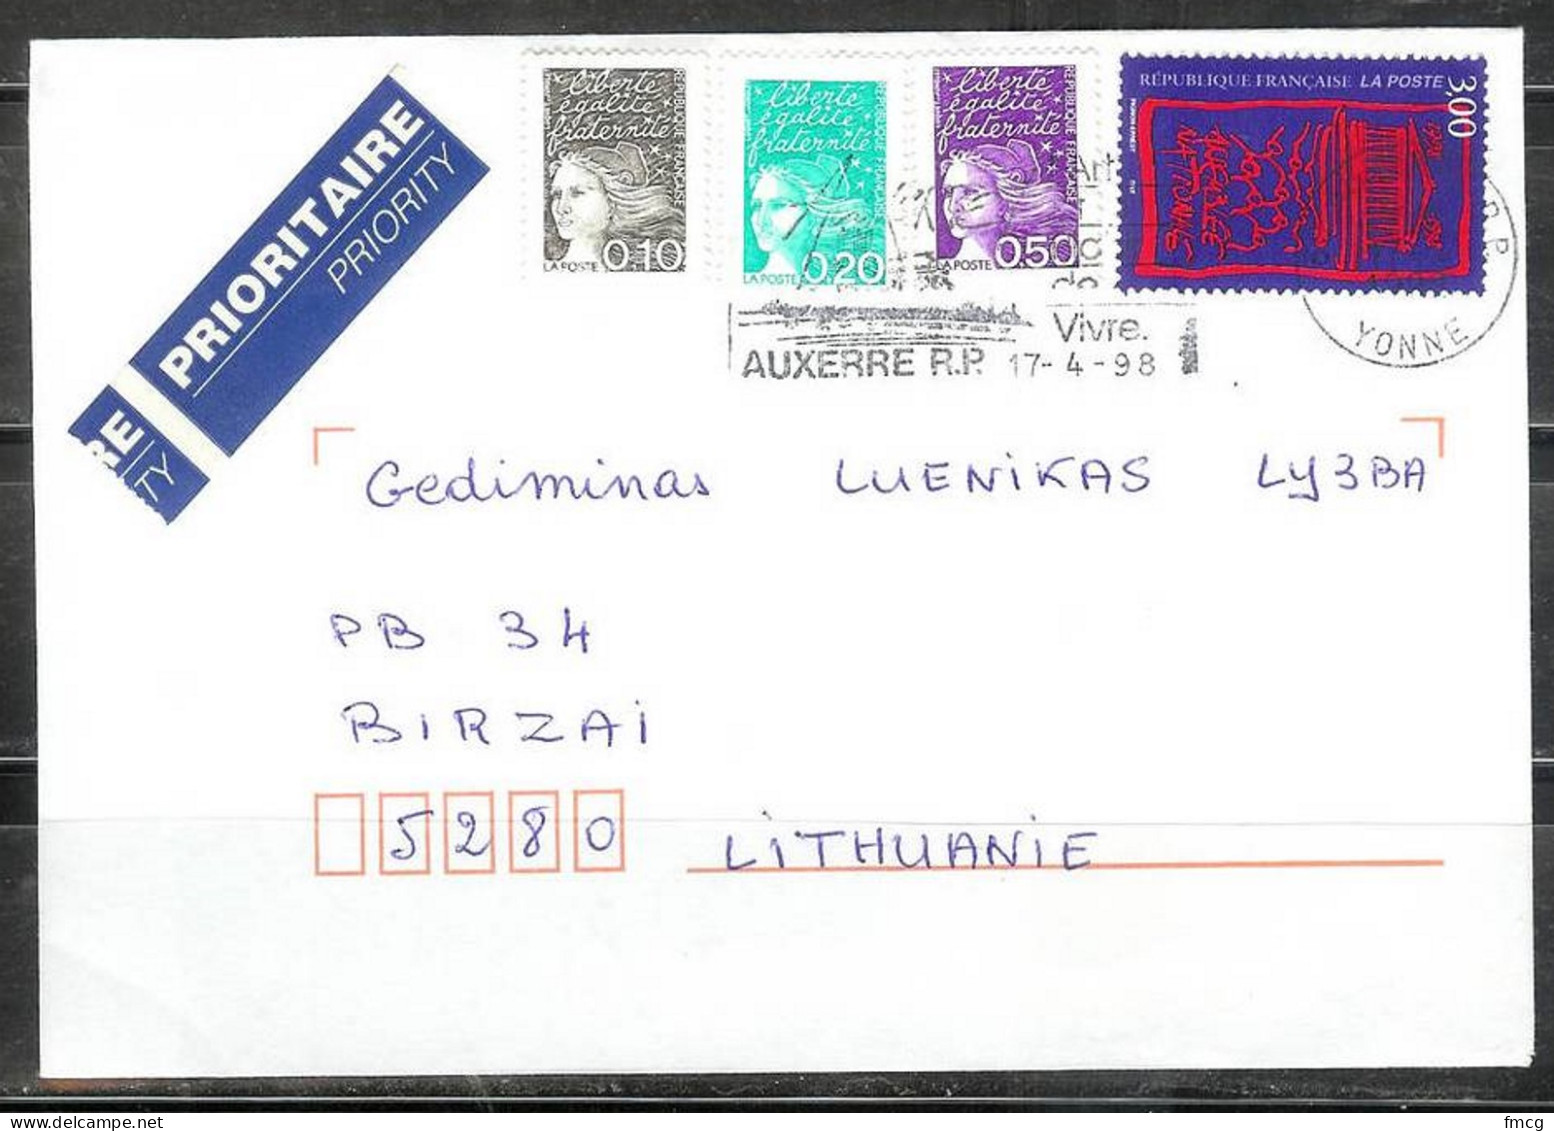  1998 National Assembly, Auxerre (17-4-98) To Lithuania - Storia Postale